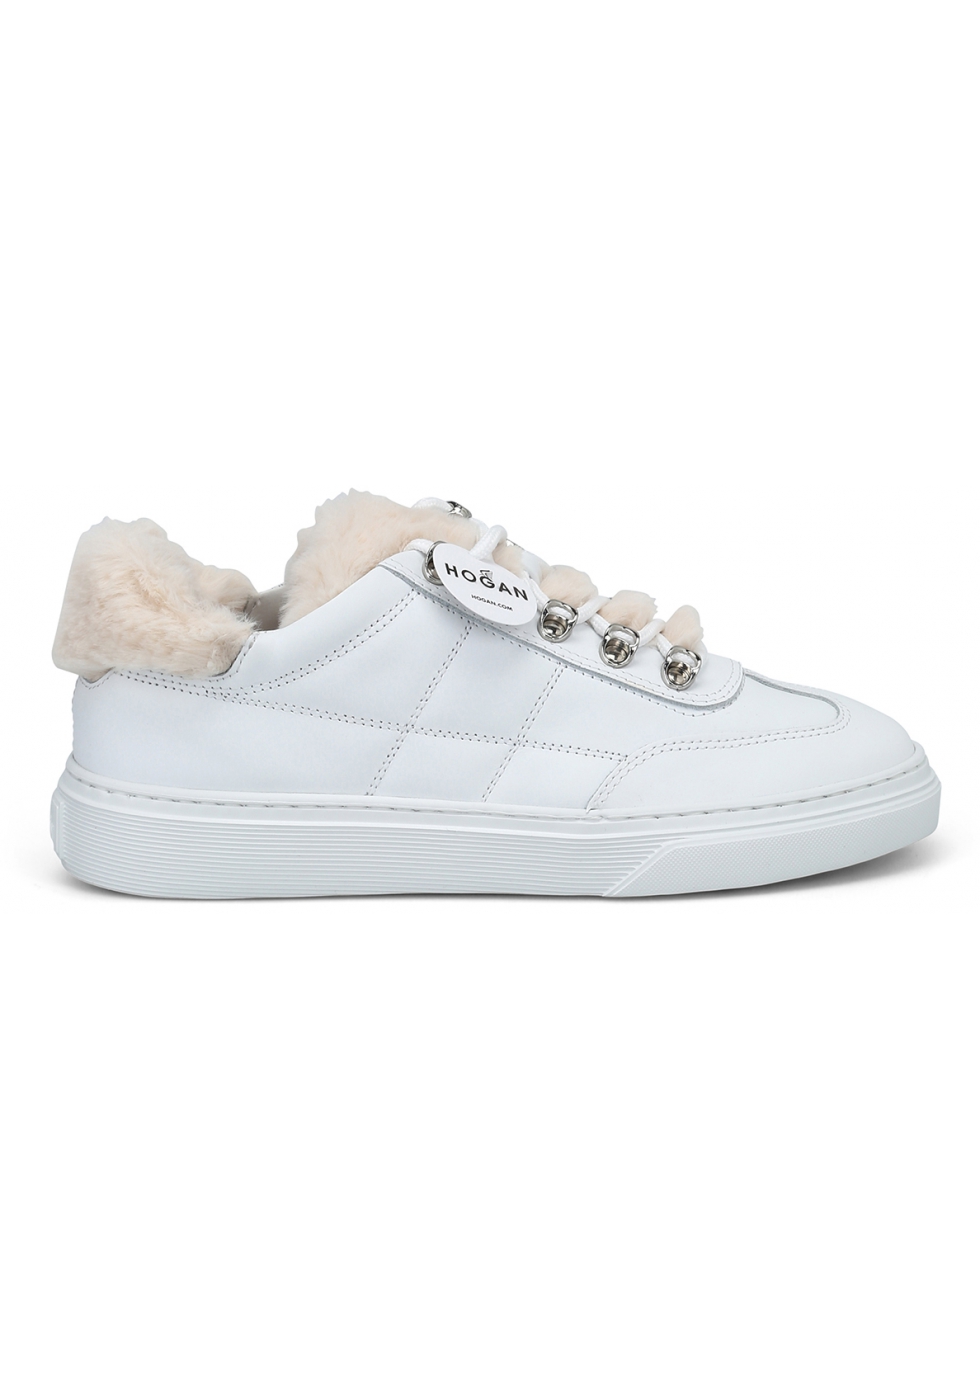 Hogan Women's fashion round toe sneakers shoes in white leather with